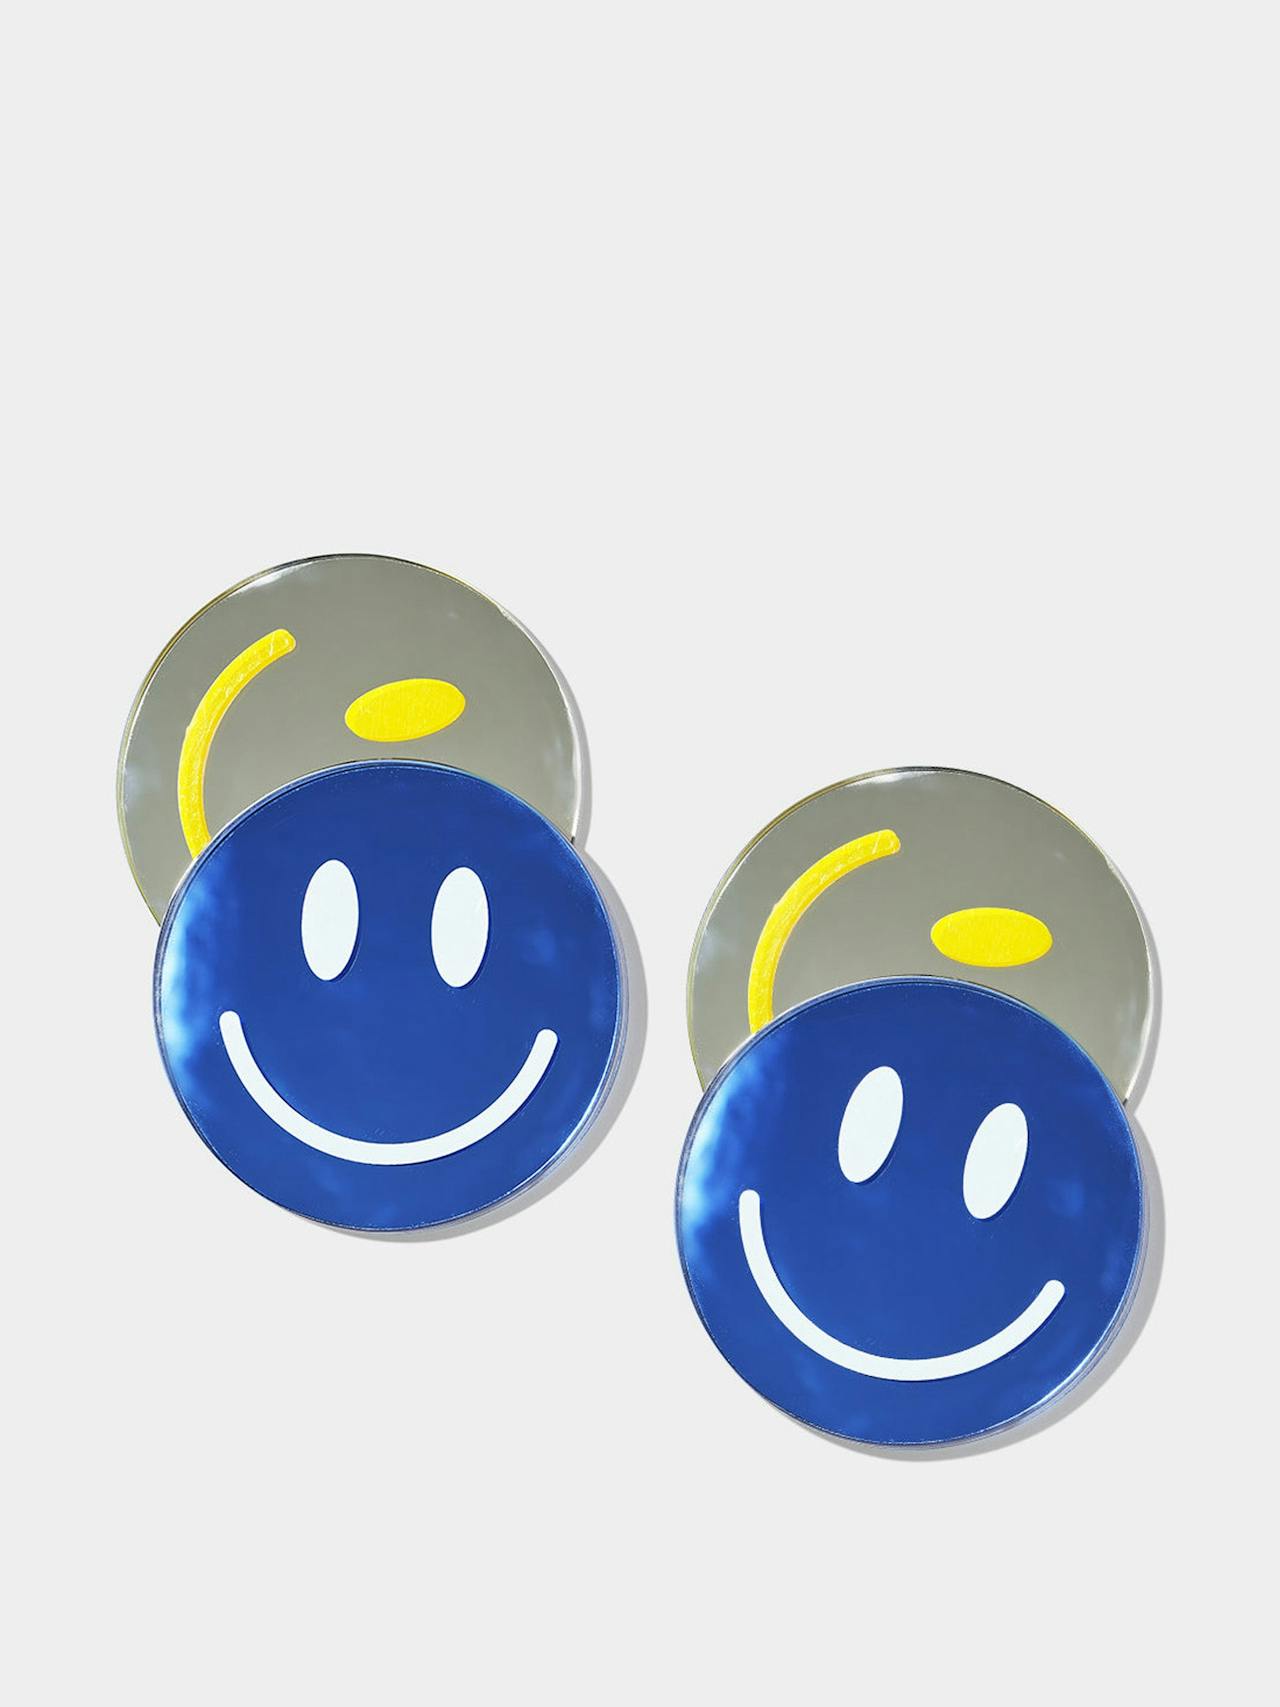 Smiley face coasters